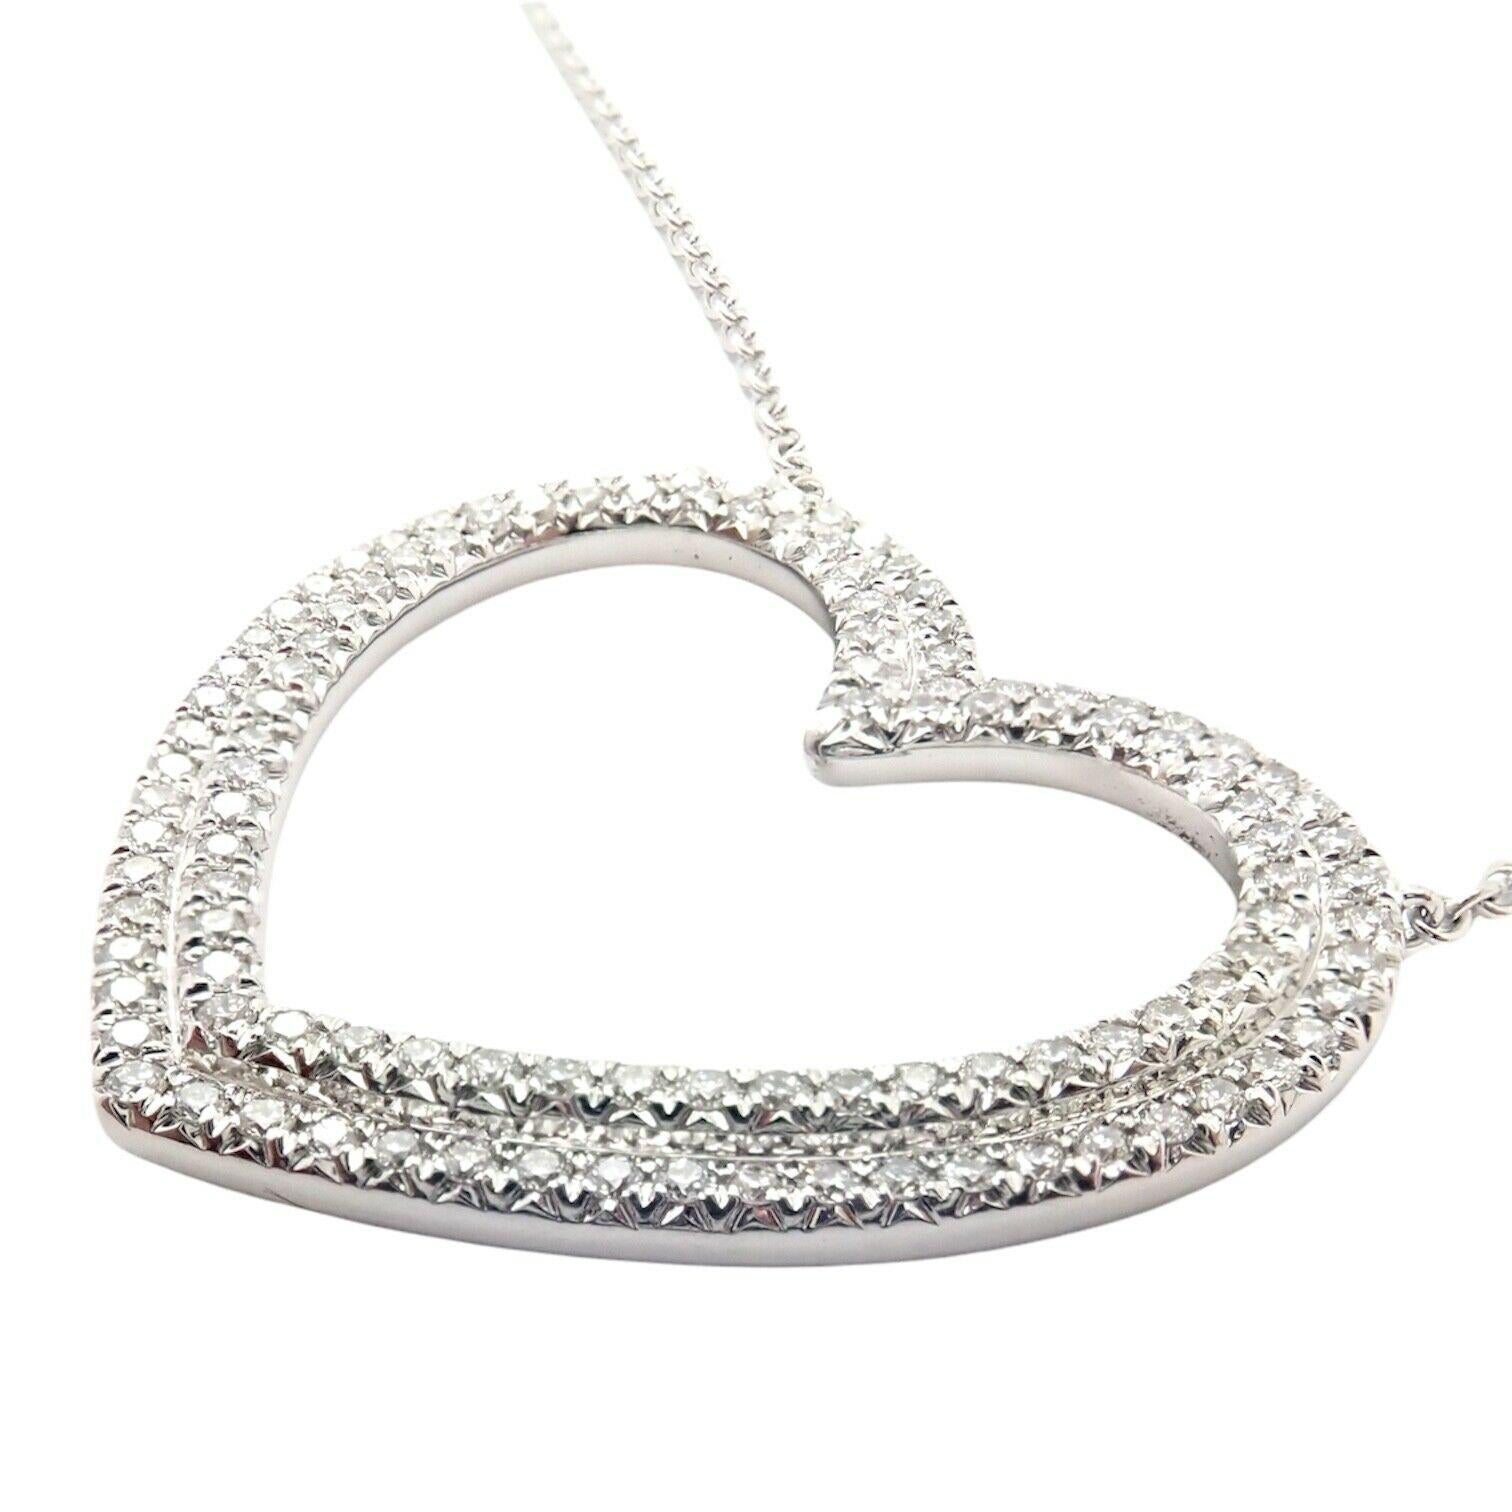 18k White Gold Metro Diamond Large Heart Pendant Necklace by Tiffany & Co.
With round diamonds VS1 clarity, G color total weight approximately 1ct
This necklace comes with Tiffany & Co. box.
Details:
Length: 19.25